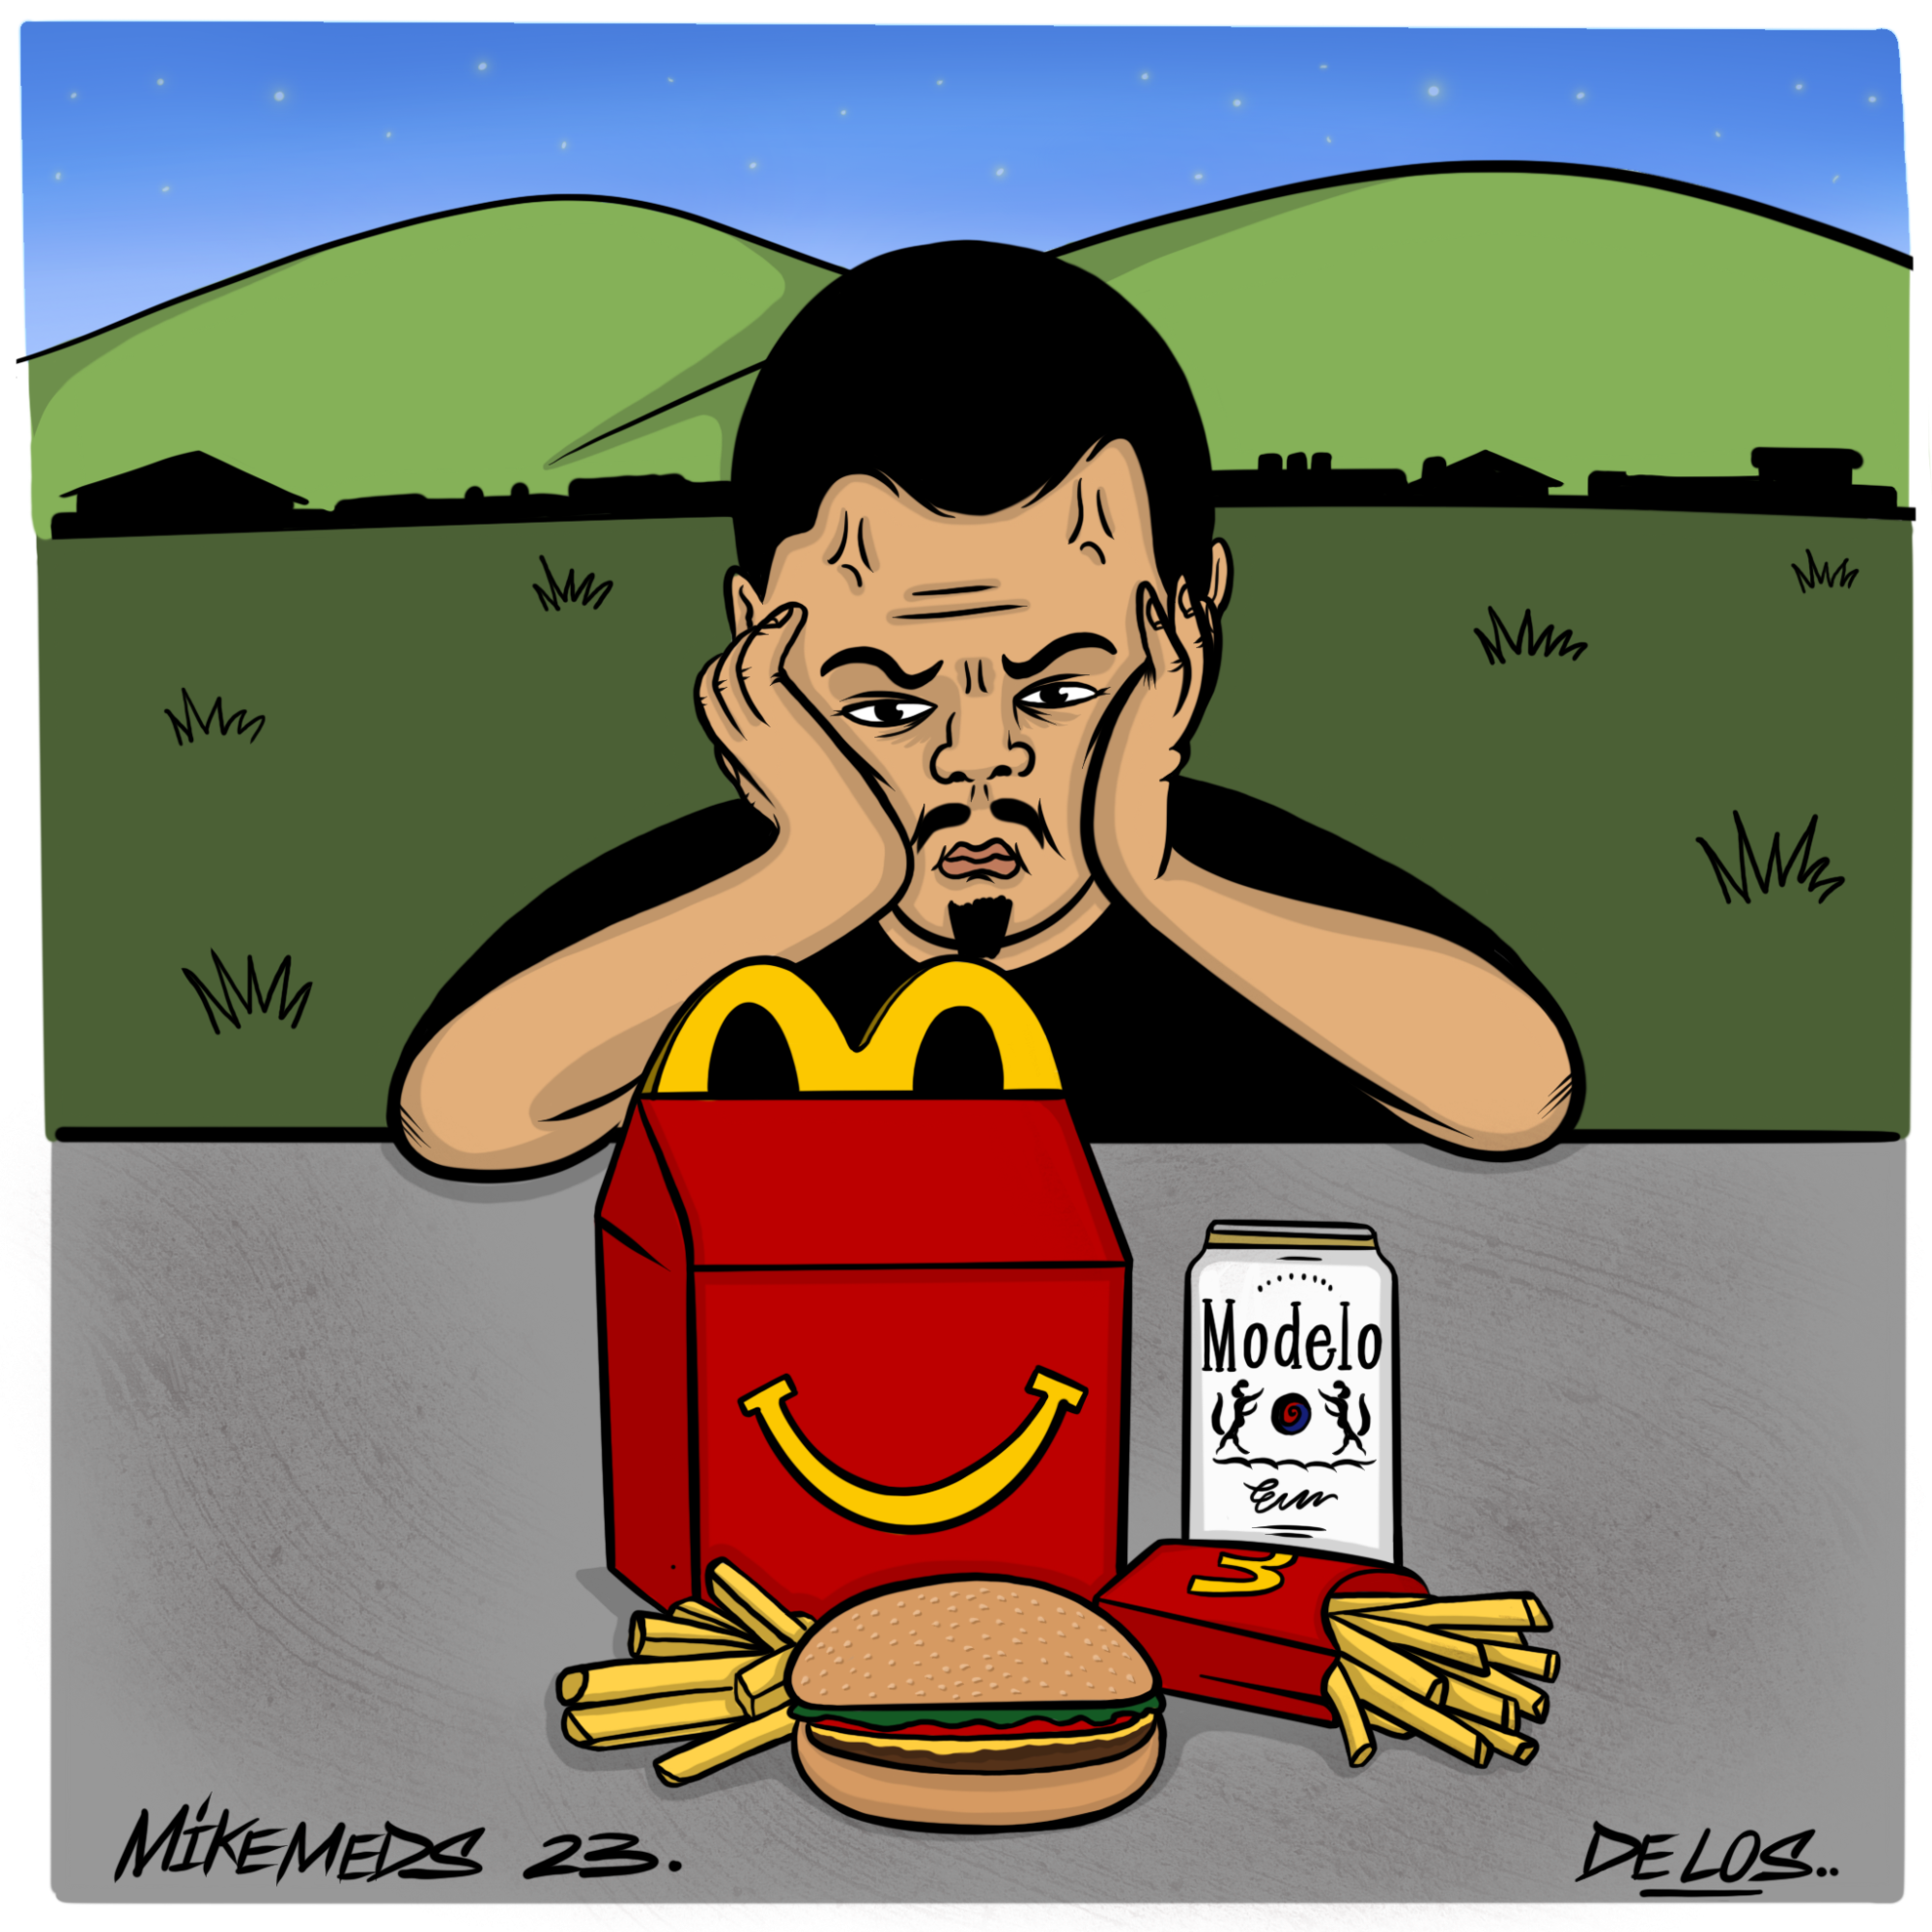 Angry man looking at a McDonald's happy meal 